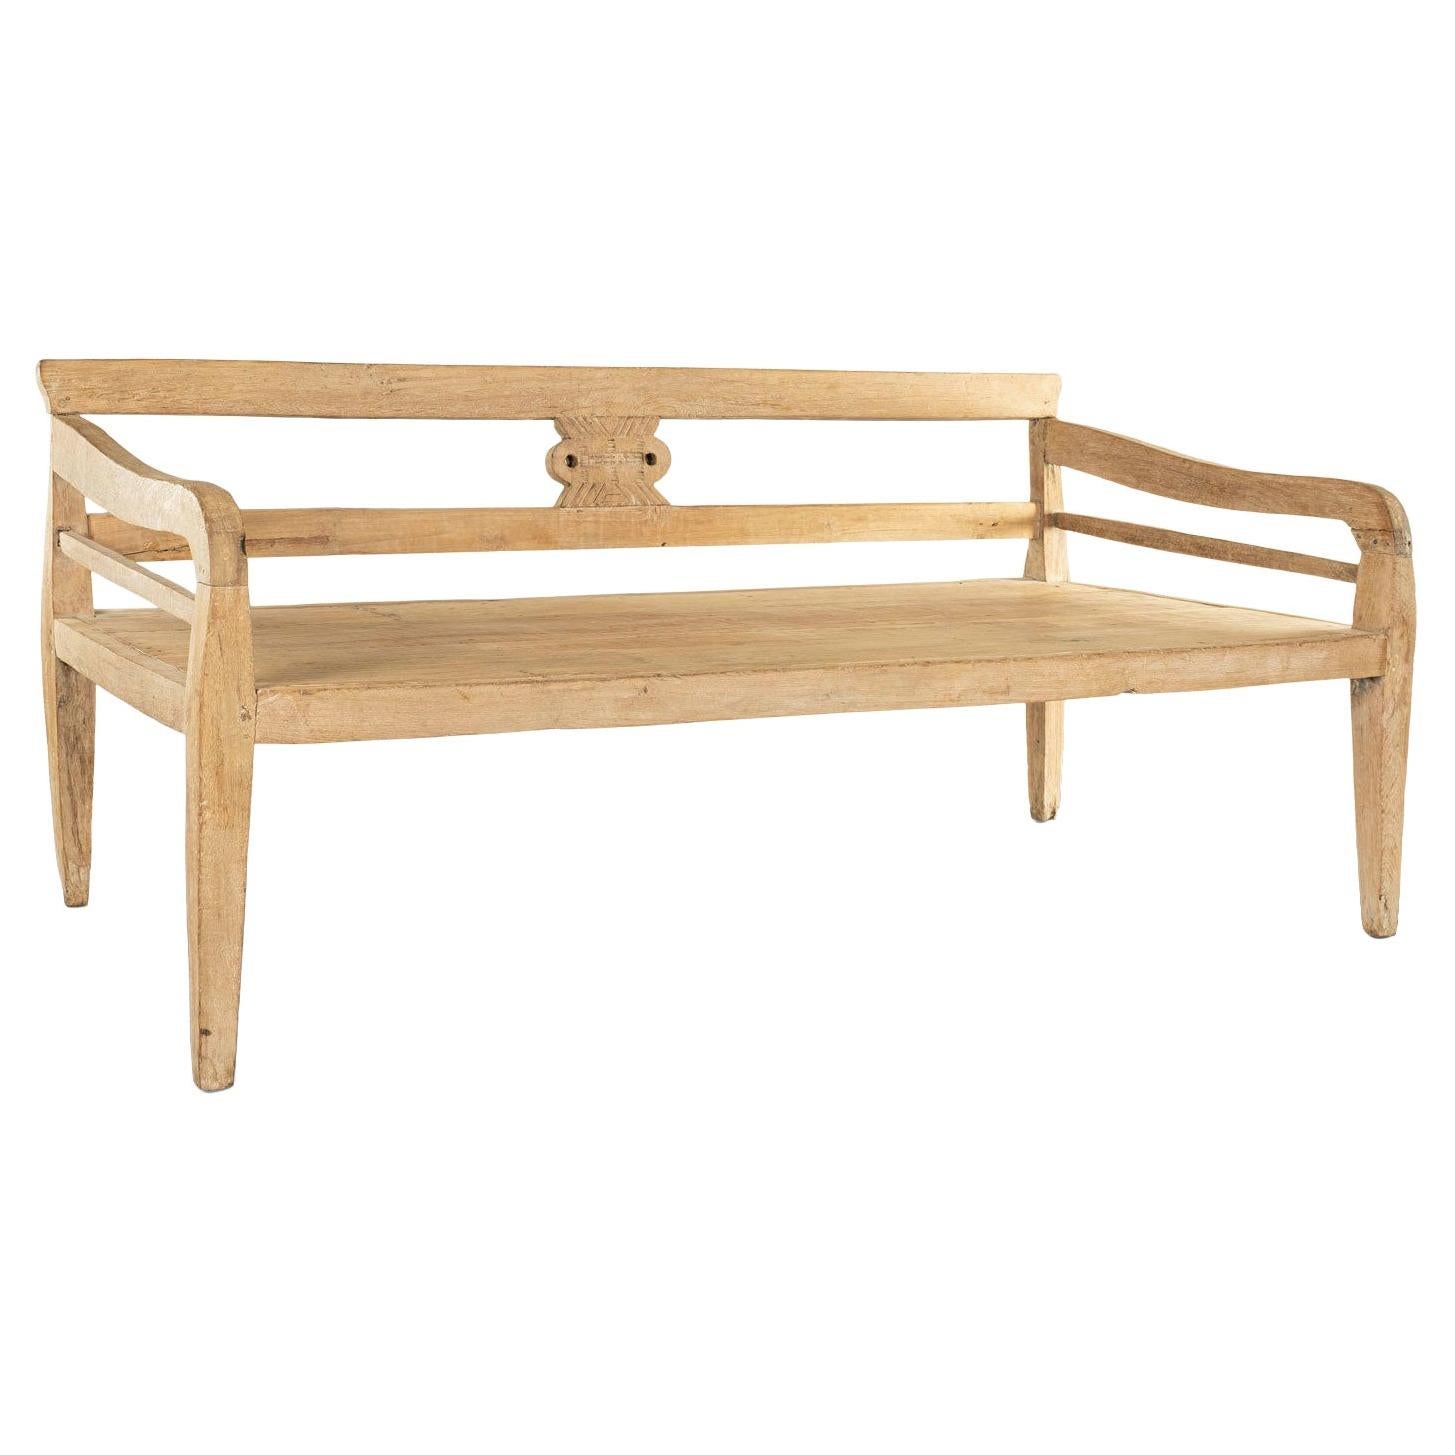 British Colonial Style Pine Daybed or Deep Bench